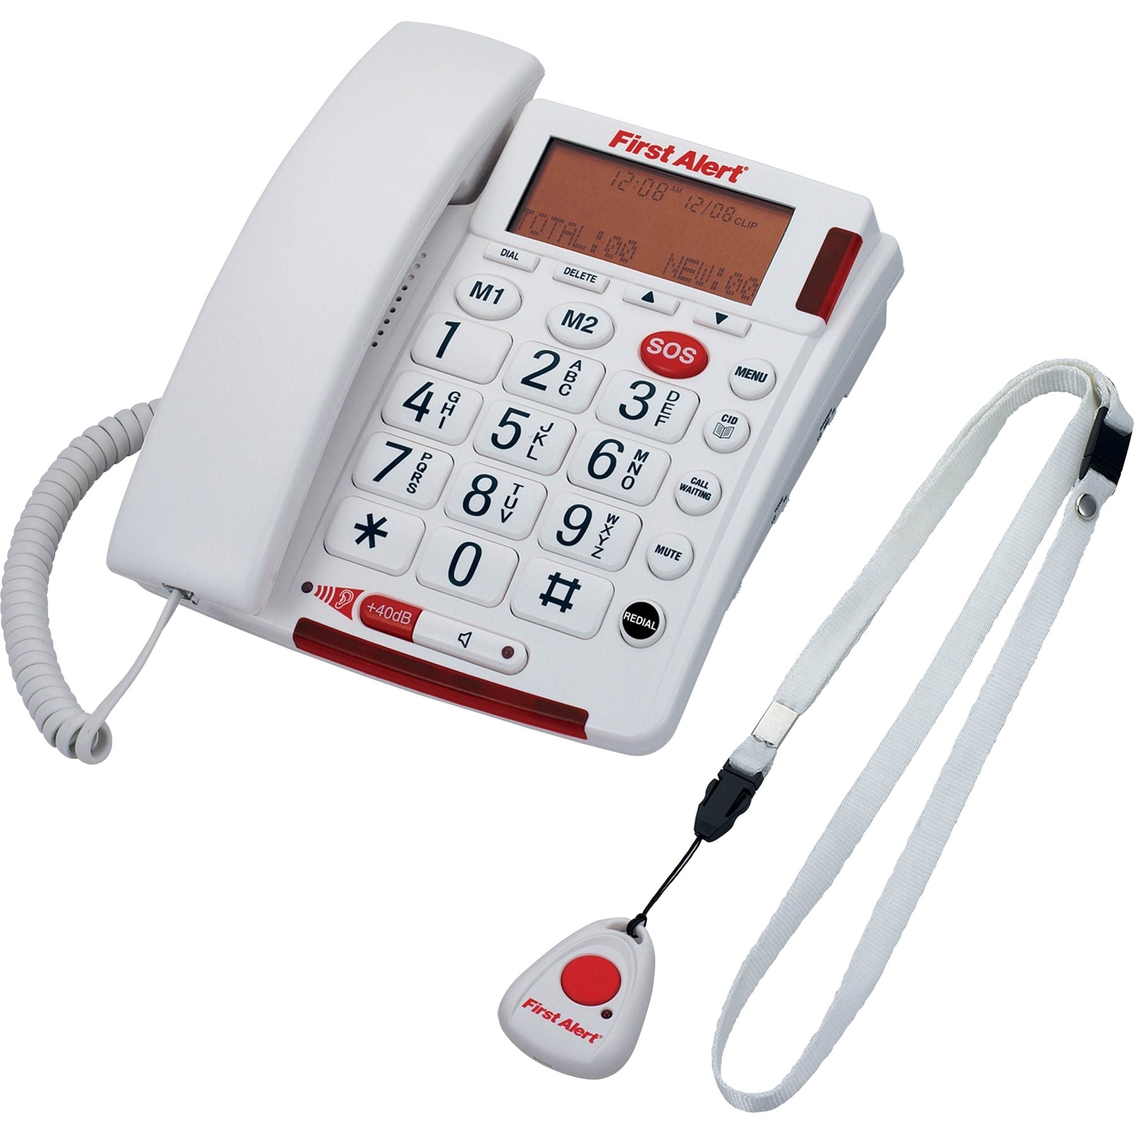 First Alert Big Button Telephone with Emergency Key and Remote Pendant